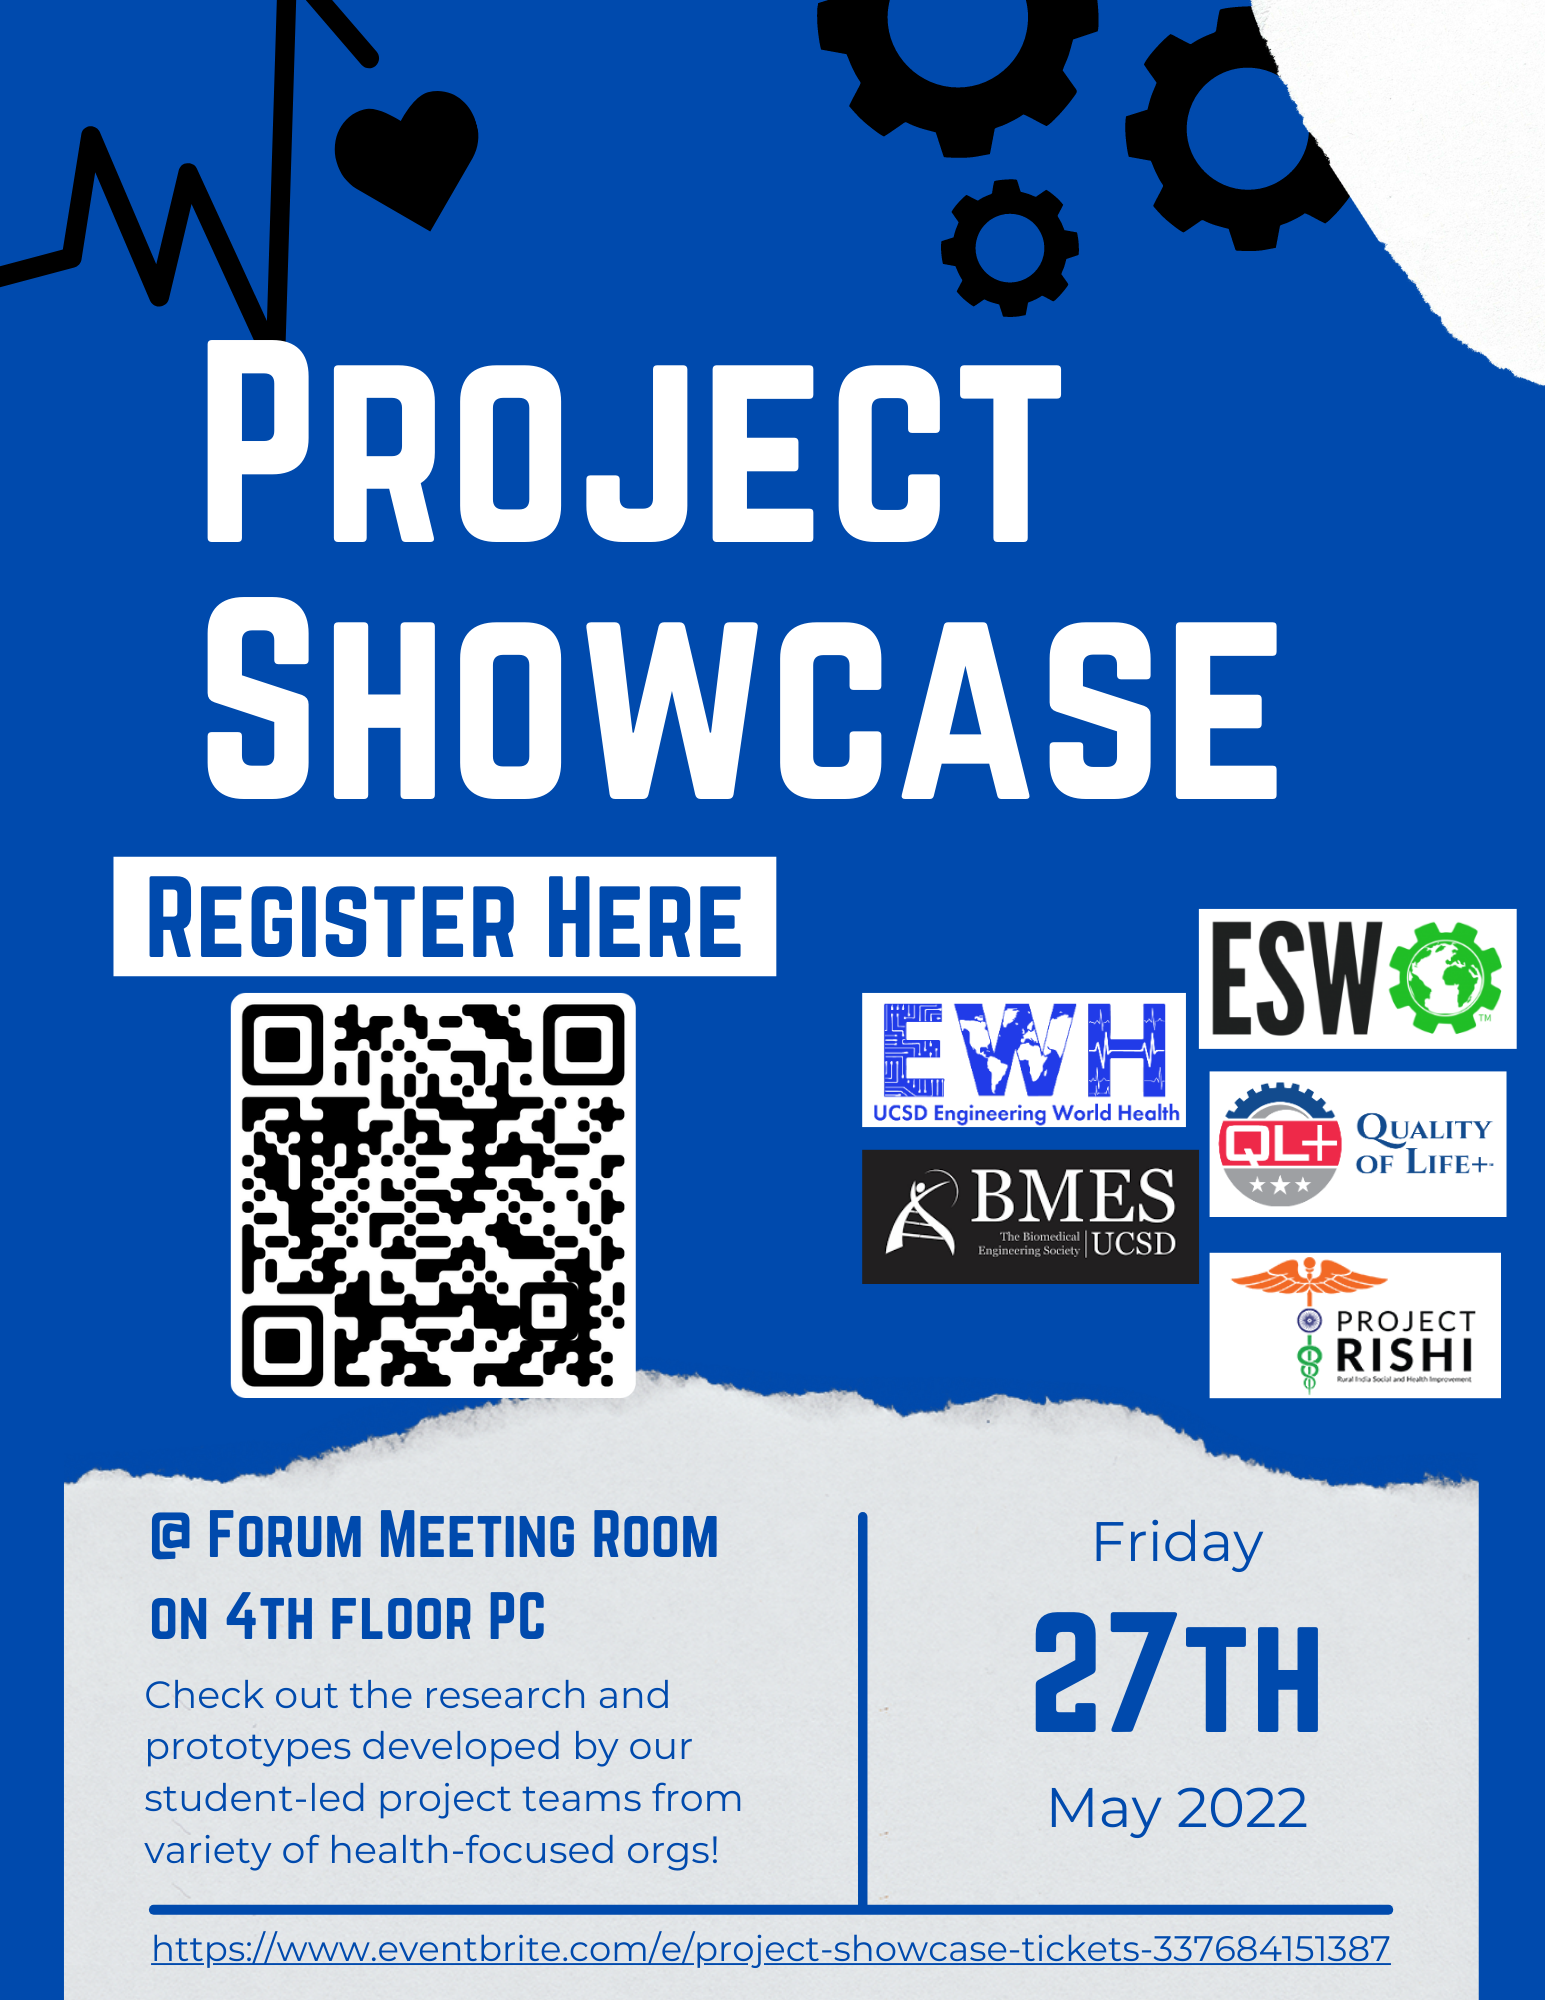 About > Project Showcase > Project Showcase